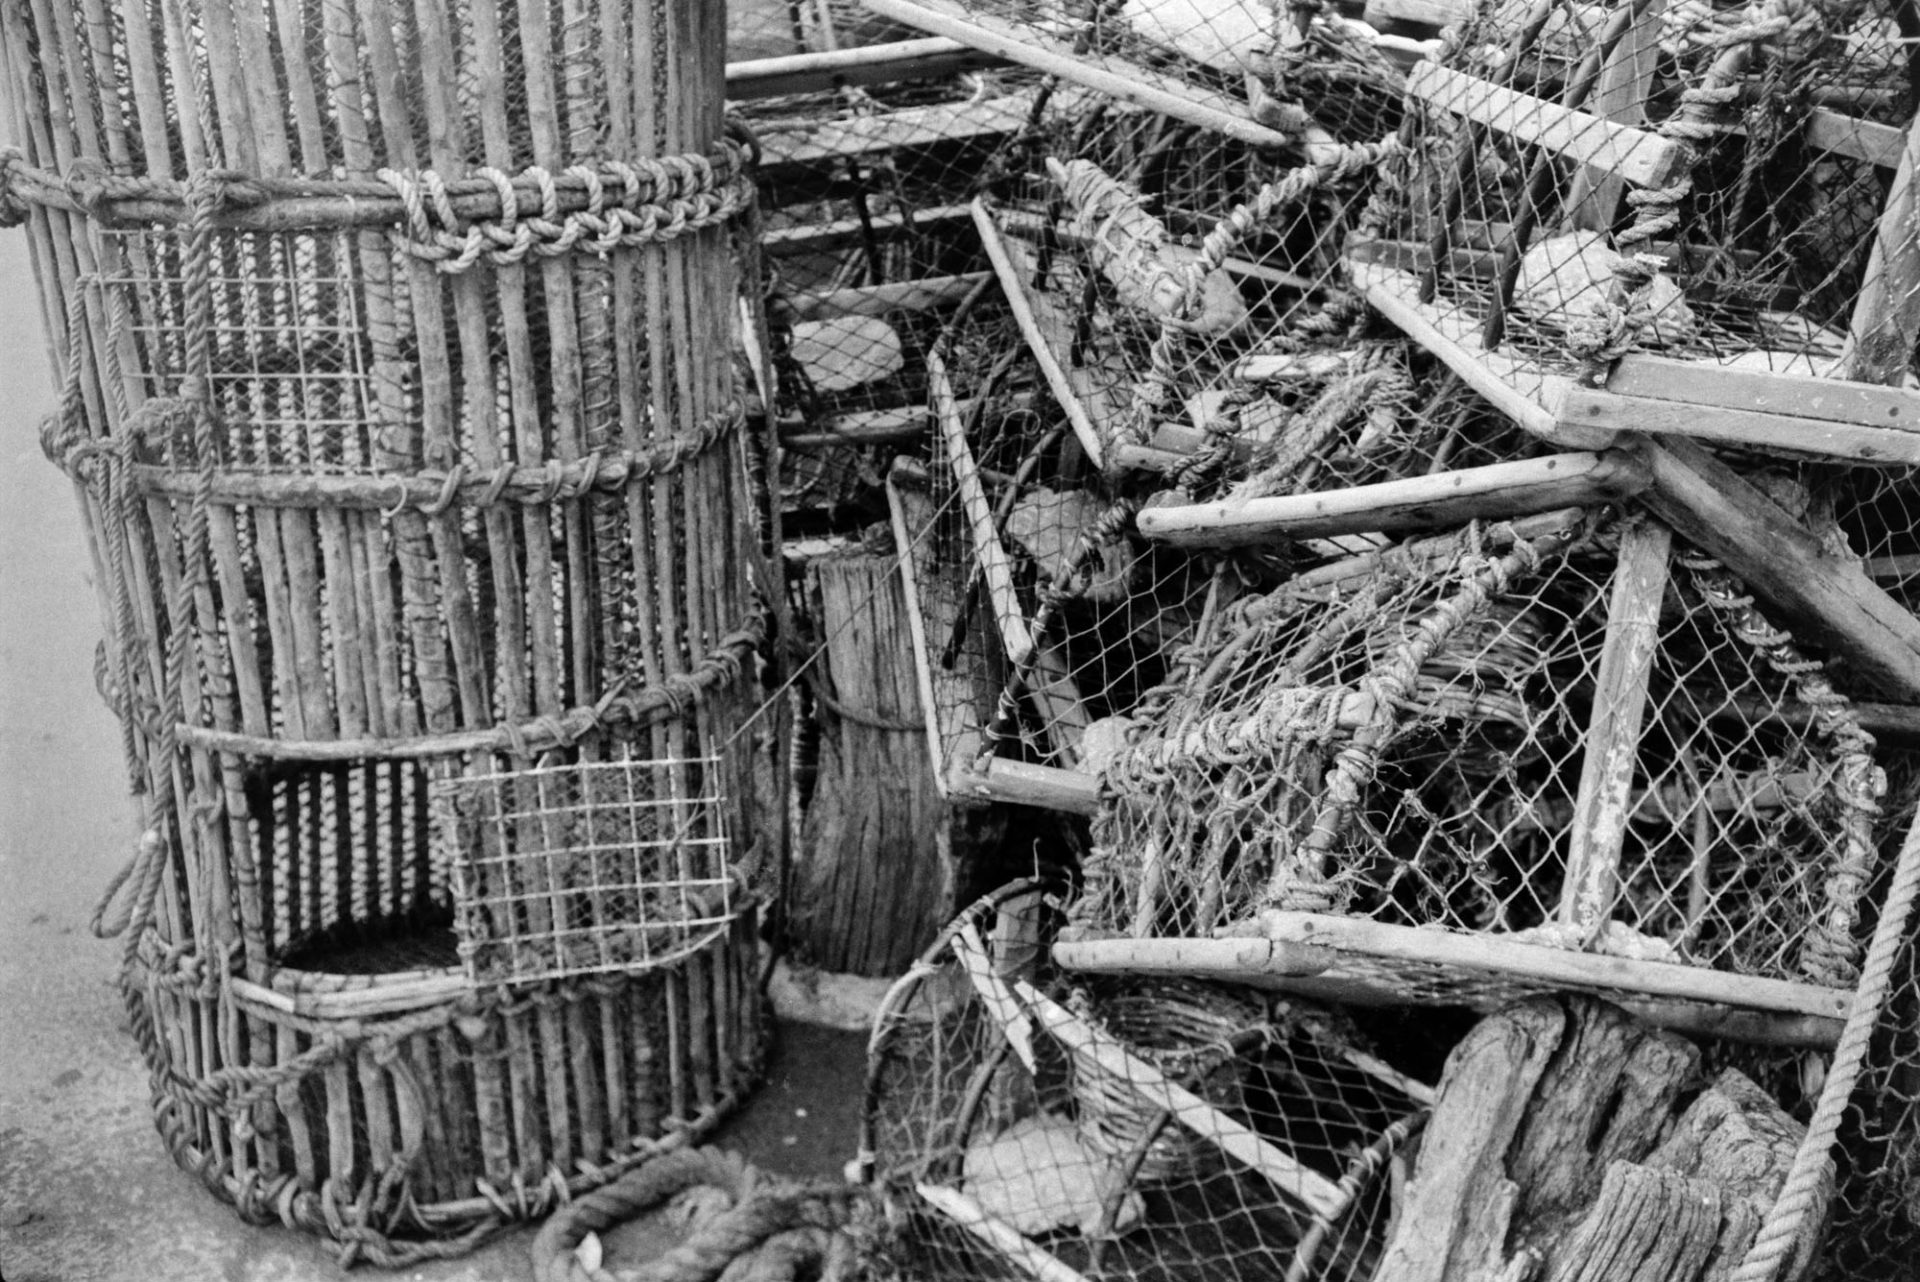 Lobster pots stacked against a wall at Ilfracombe.